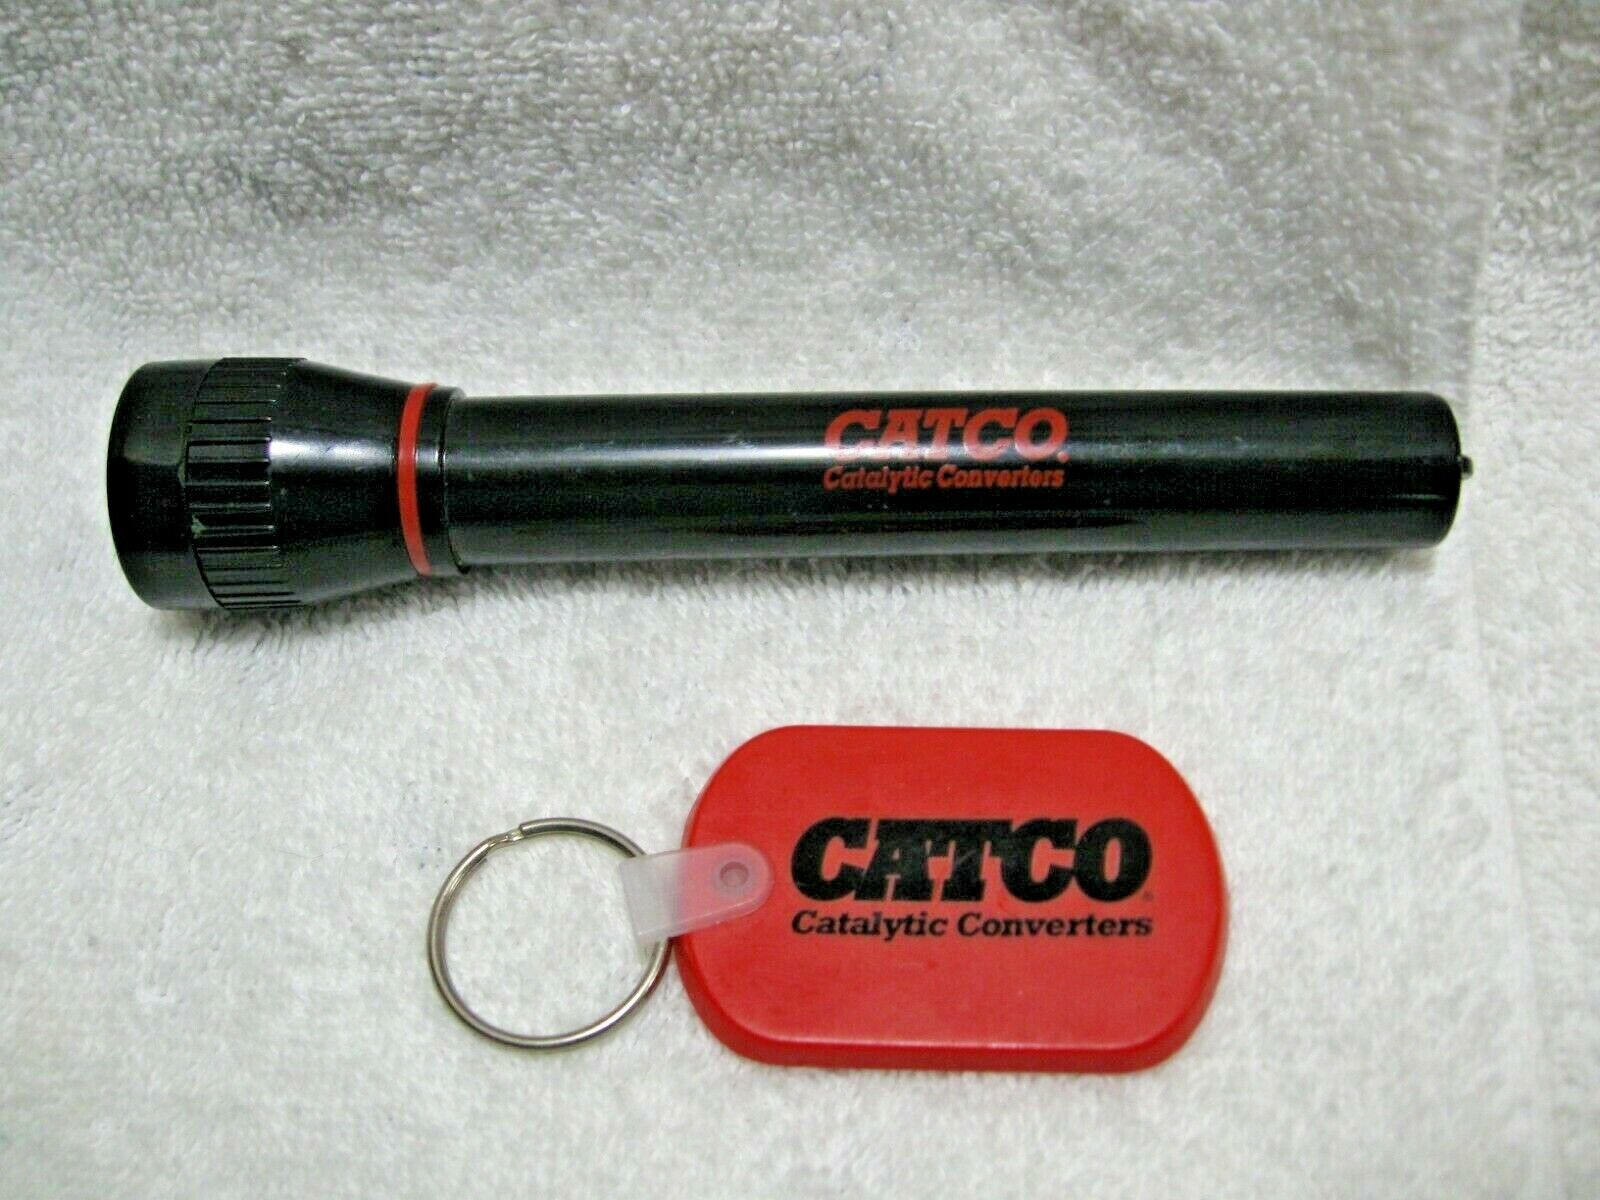 CATCO Catalytic Converters Promotional Soft Key FOB and Penlight Flashlight-Shop